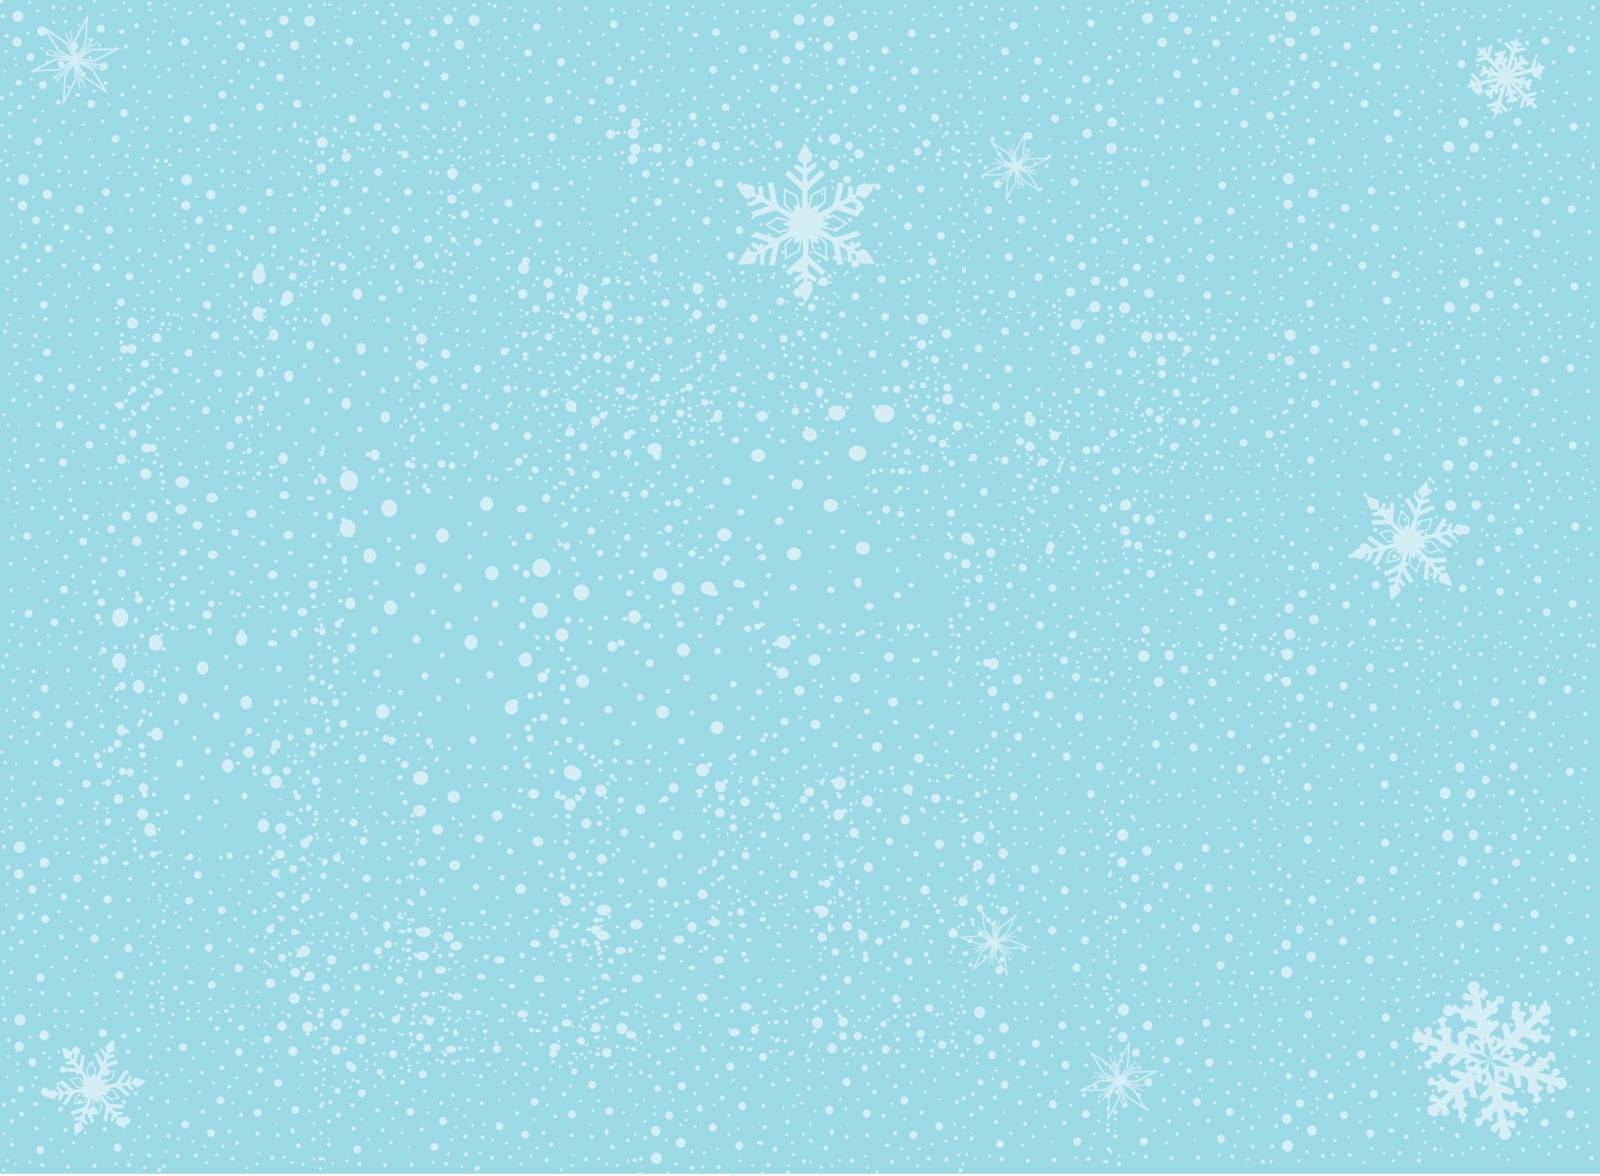 A cold winter snowflake background with falling snow